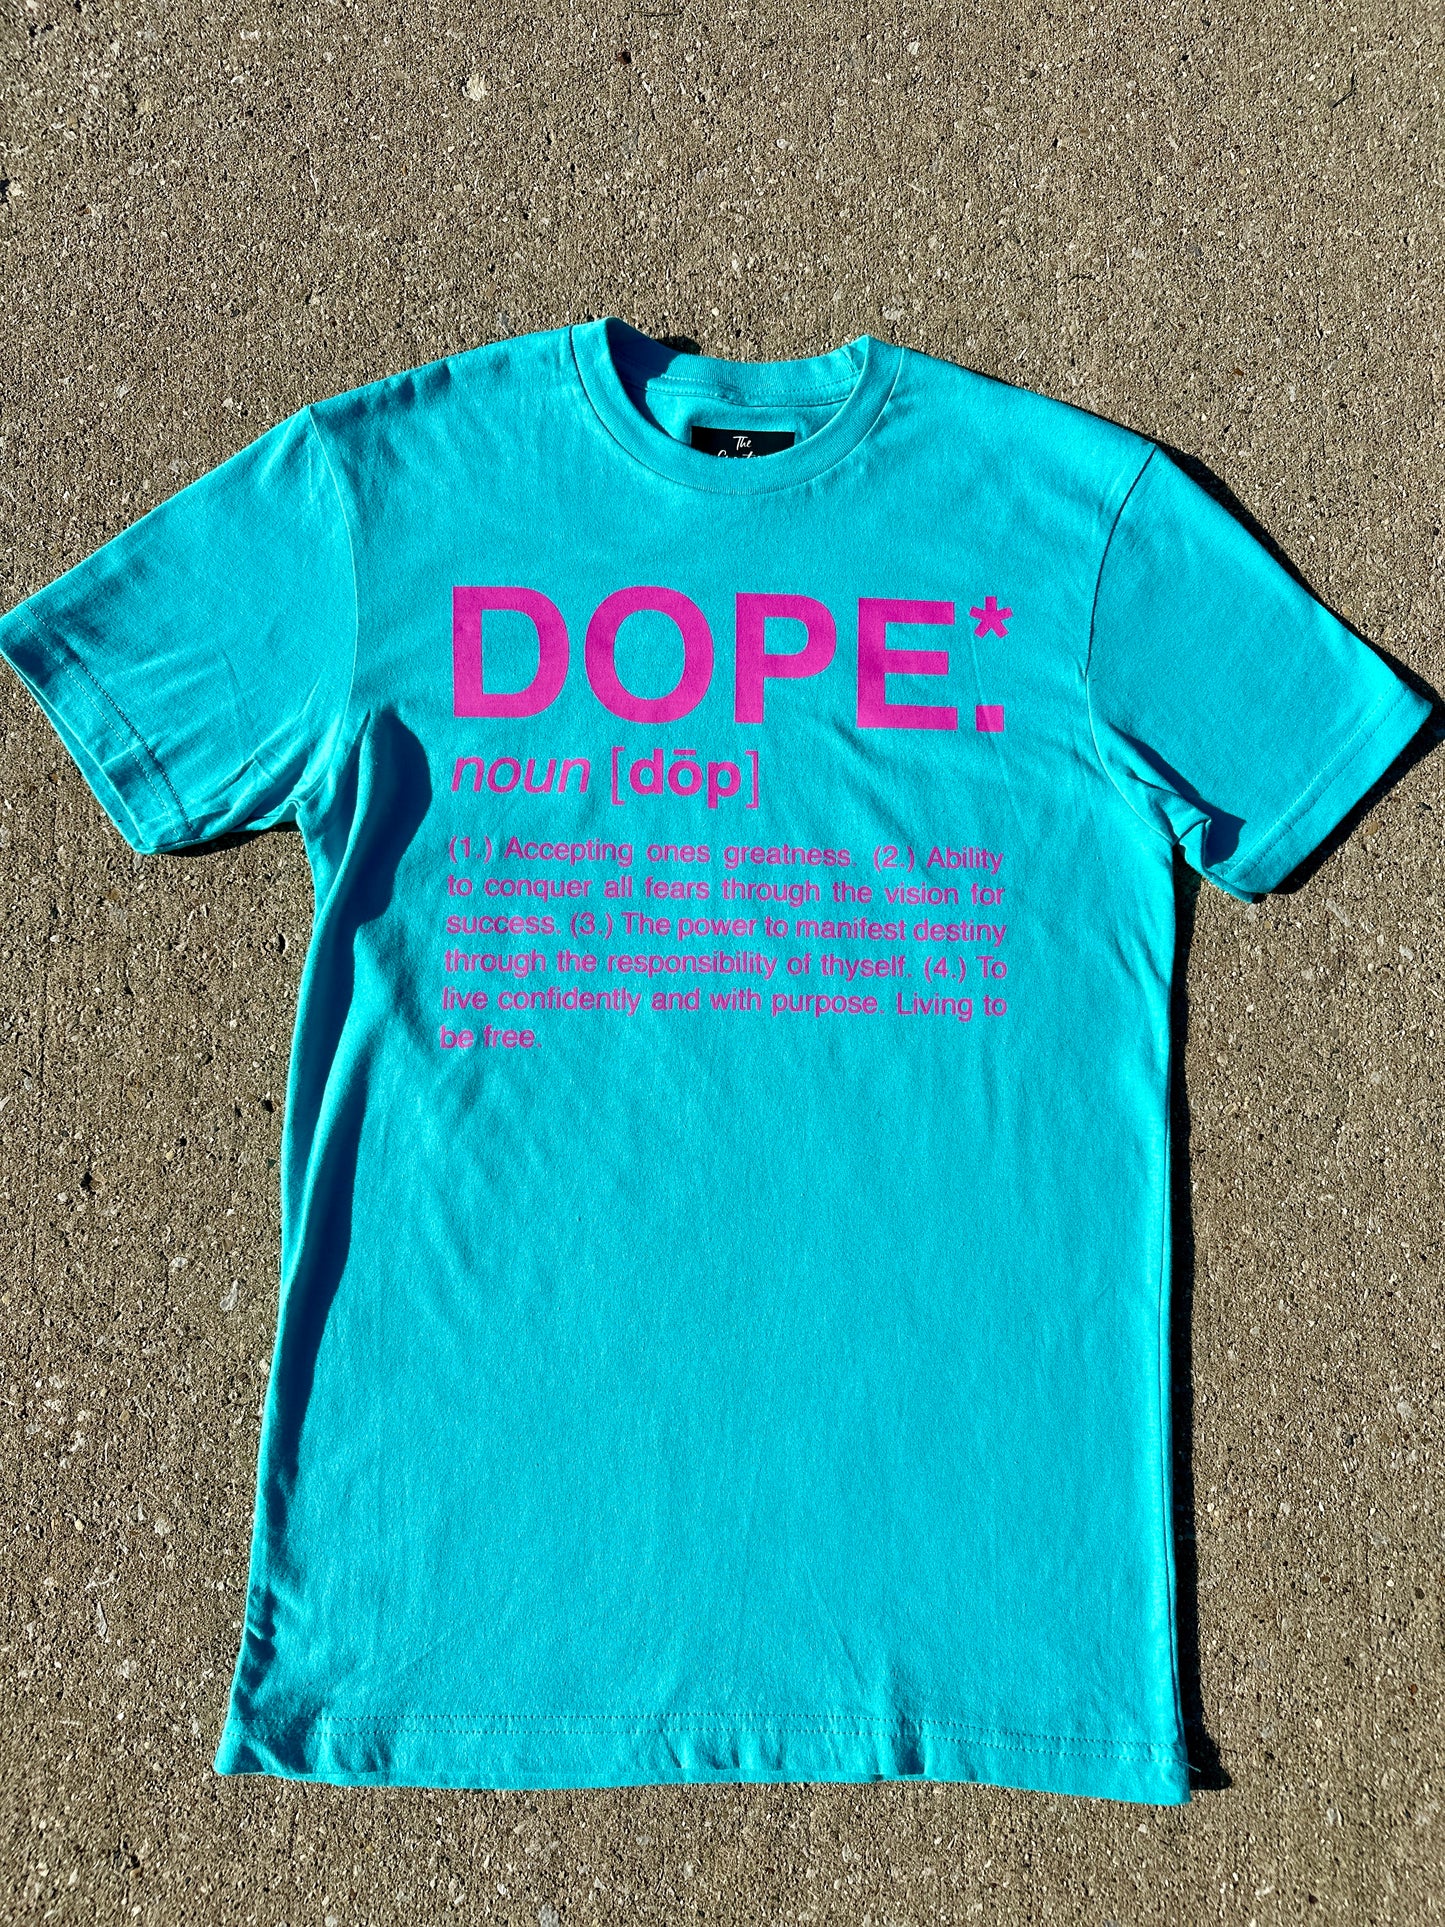 Dope T-shirt- Tropical Punch